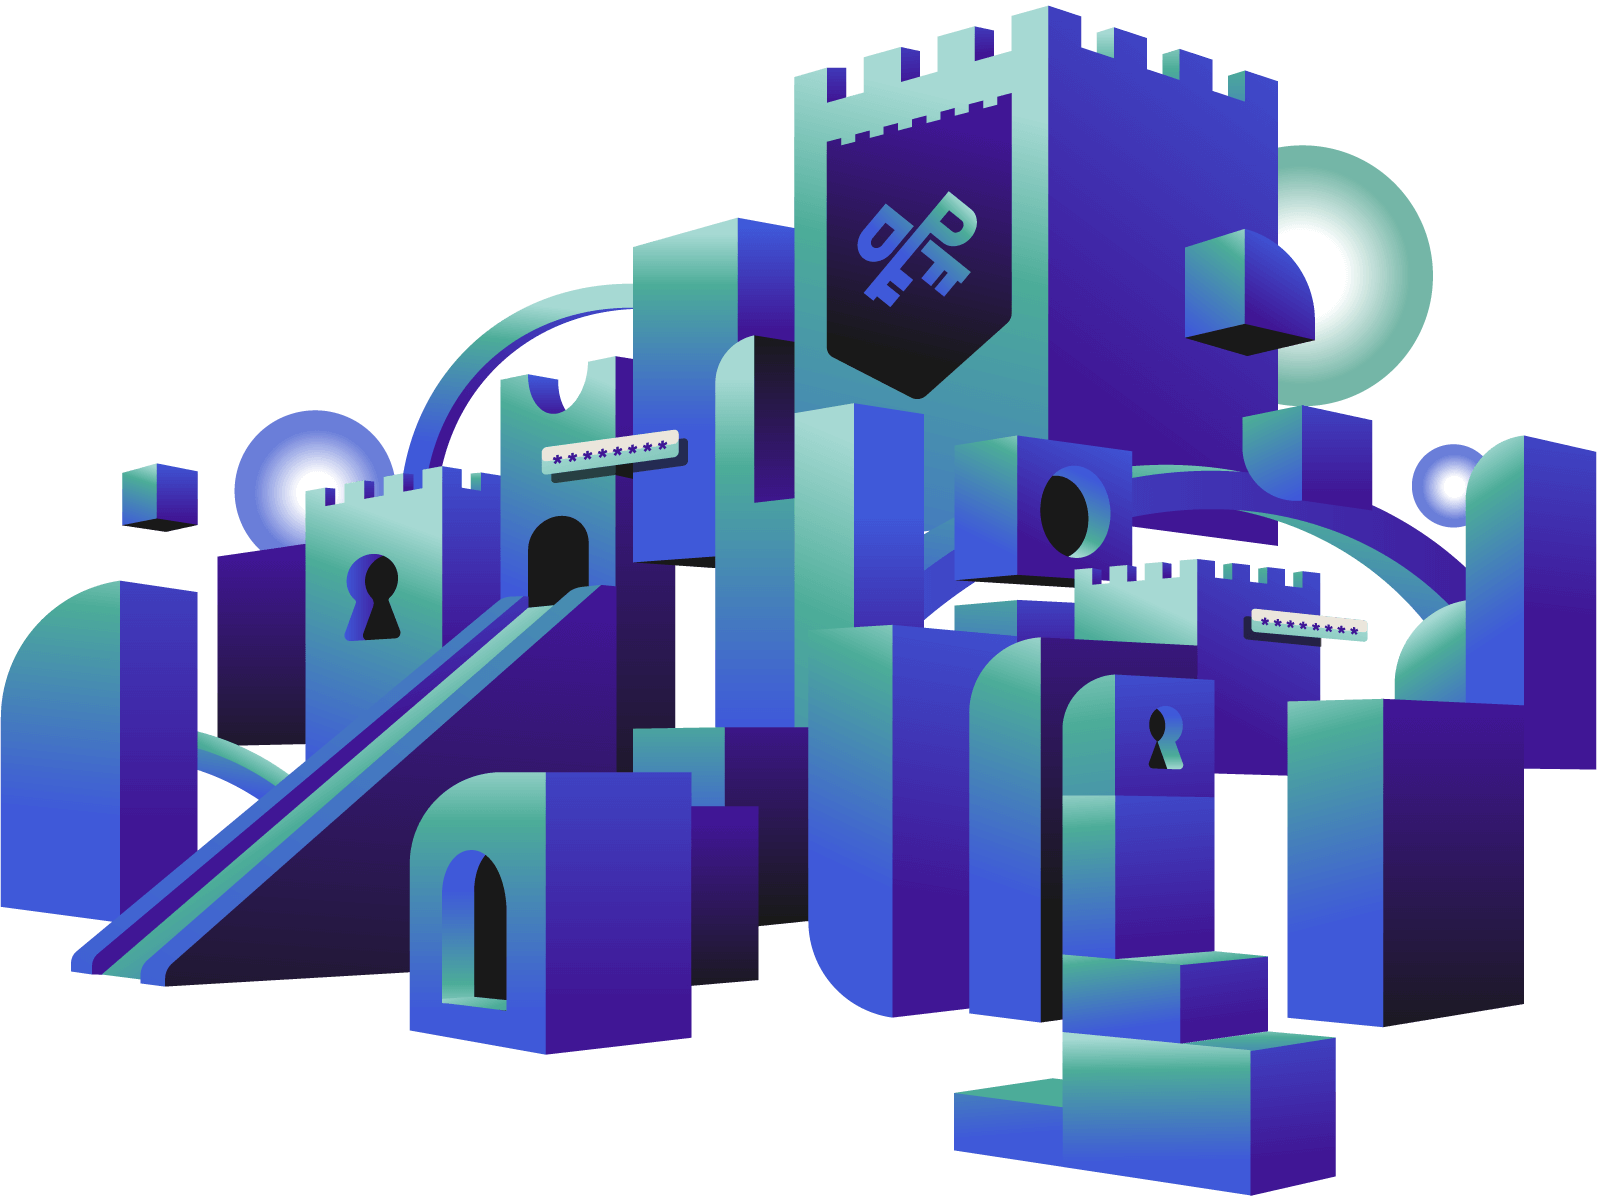 Castle representing a fortress protected by passkeys